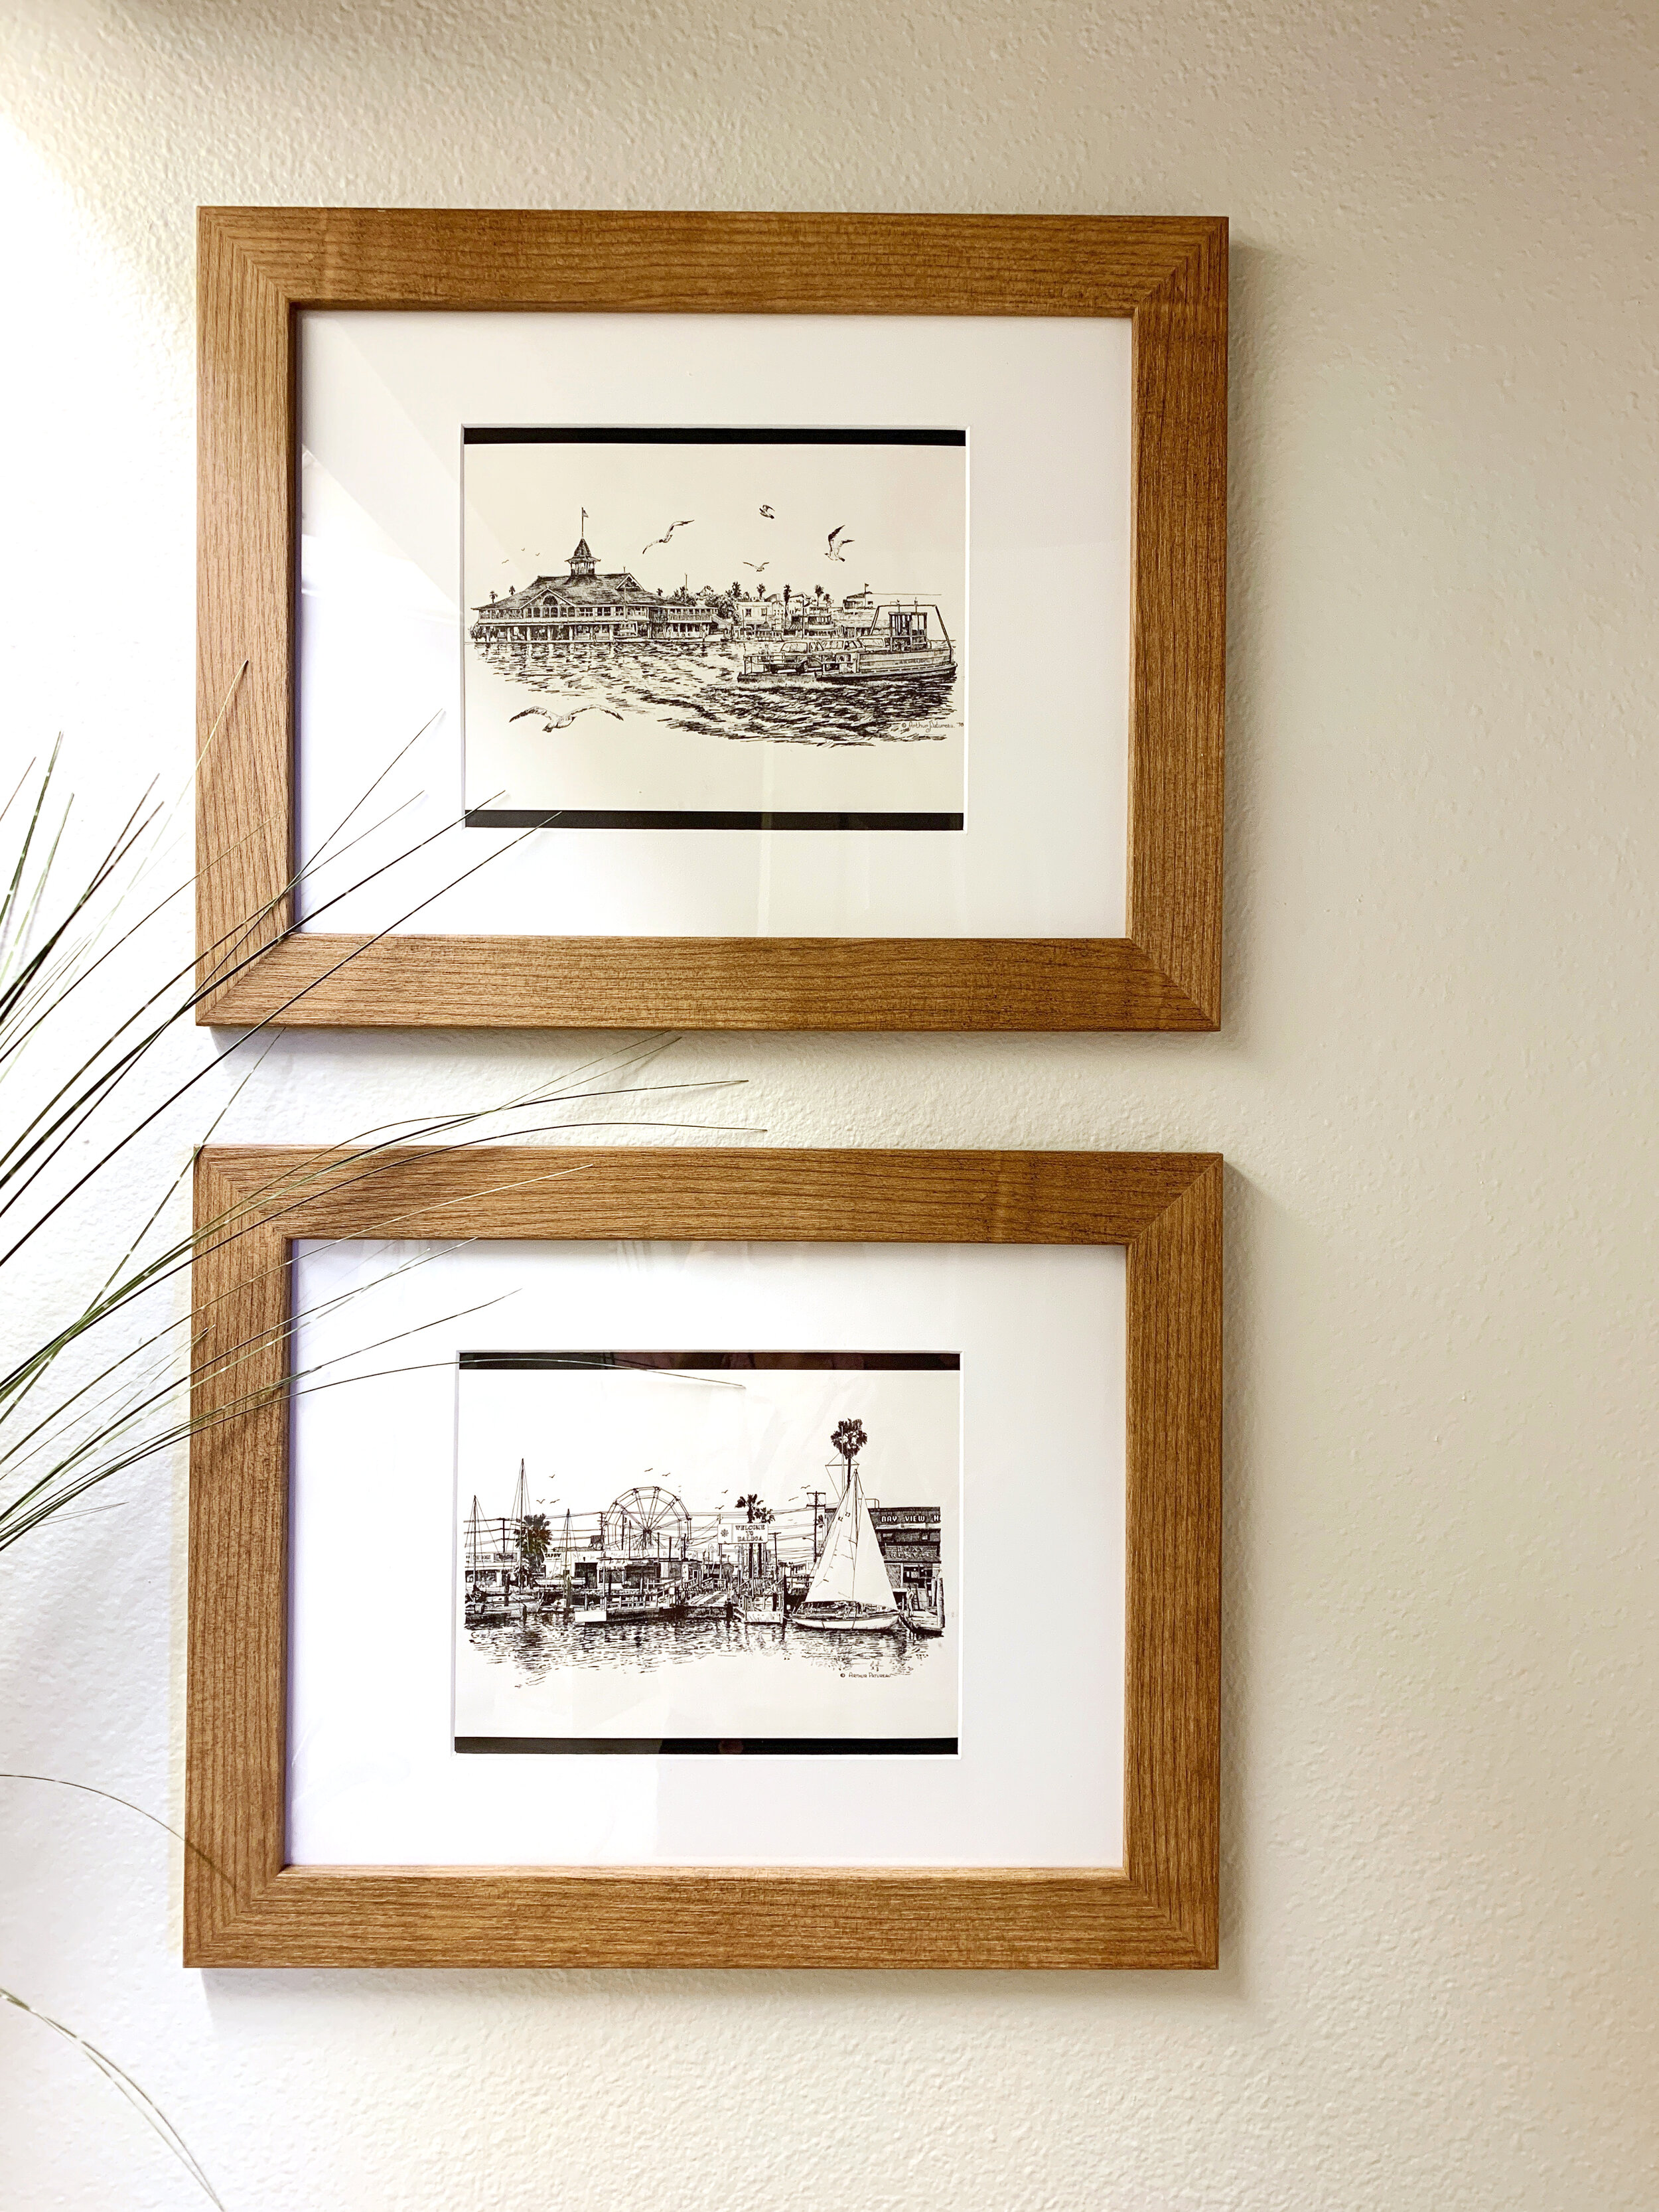  These prints are of a beloved spot that we visit often. Balboa Island in Newport, CA. If you’ve been, you’d recognize it from these right away. My mom had these stored away and what good was that doing? I pulled them out and added them to this room 